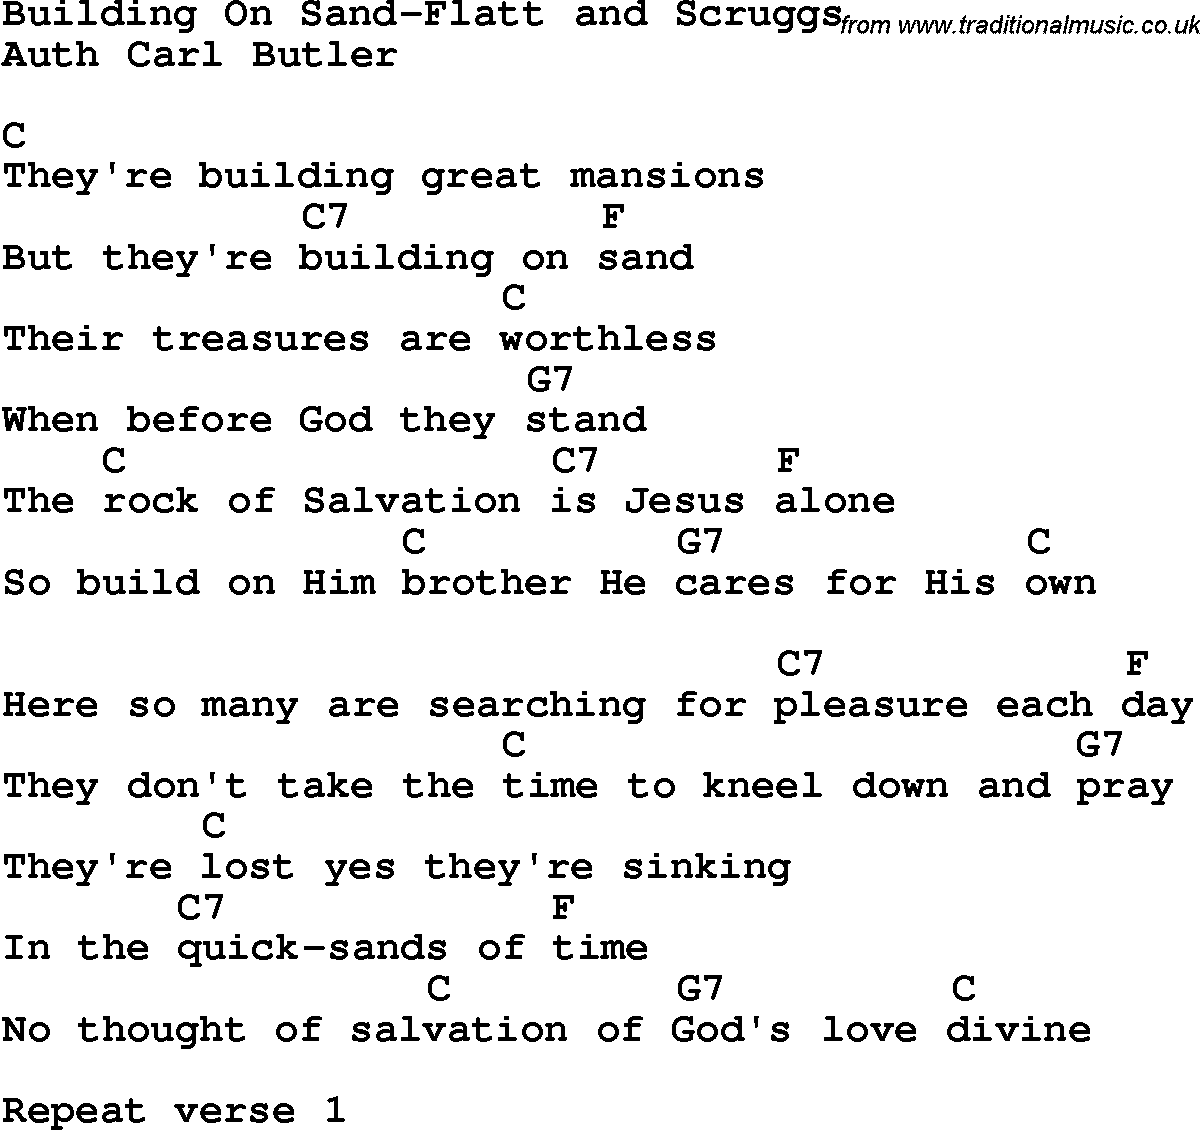 Country, Southern and Bluegrass Gospel Song Building On Sand-Flatt and Scruggs lyrics and chords